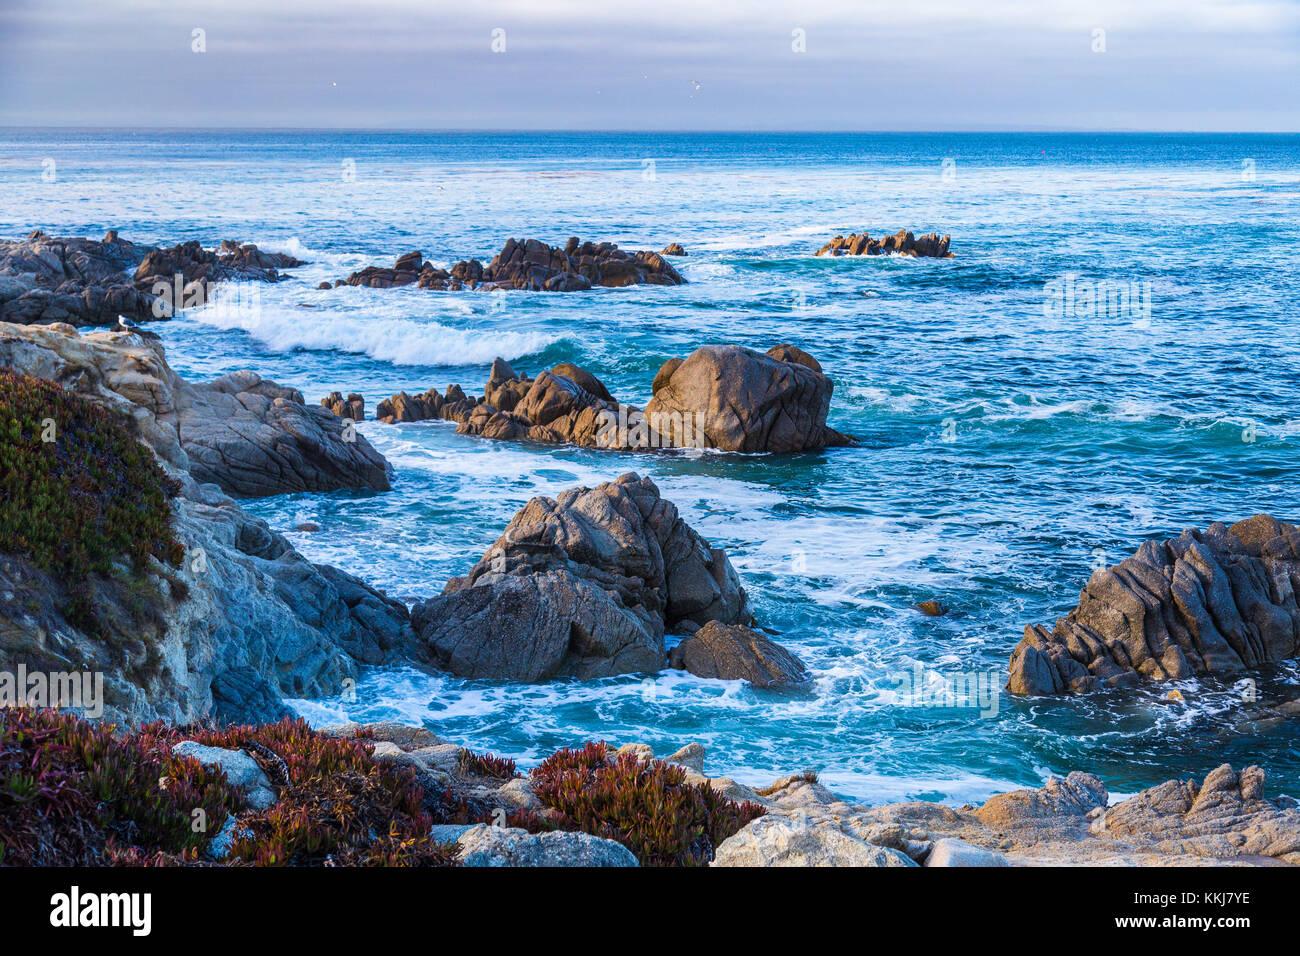 Seascape of Monterey Bay at sunset in Pacific Grove, California, USA Stock Photo